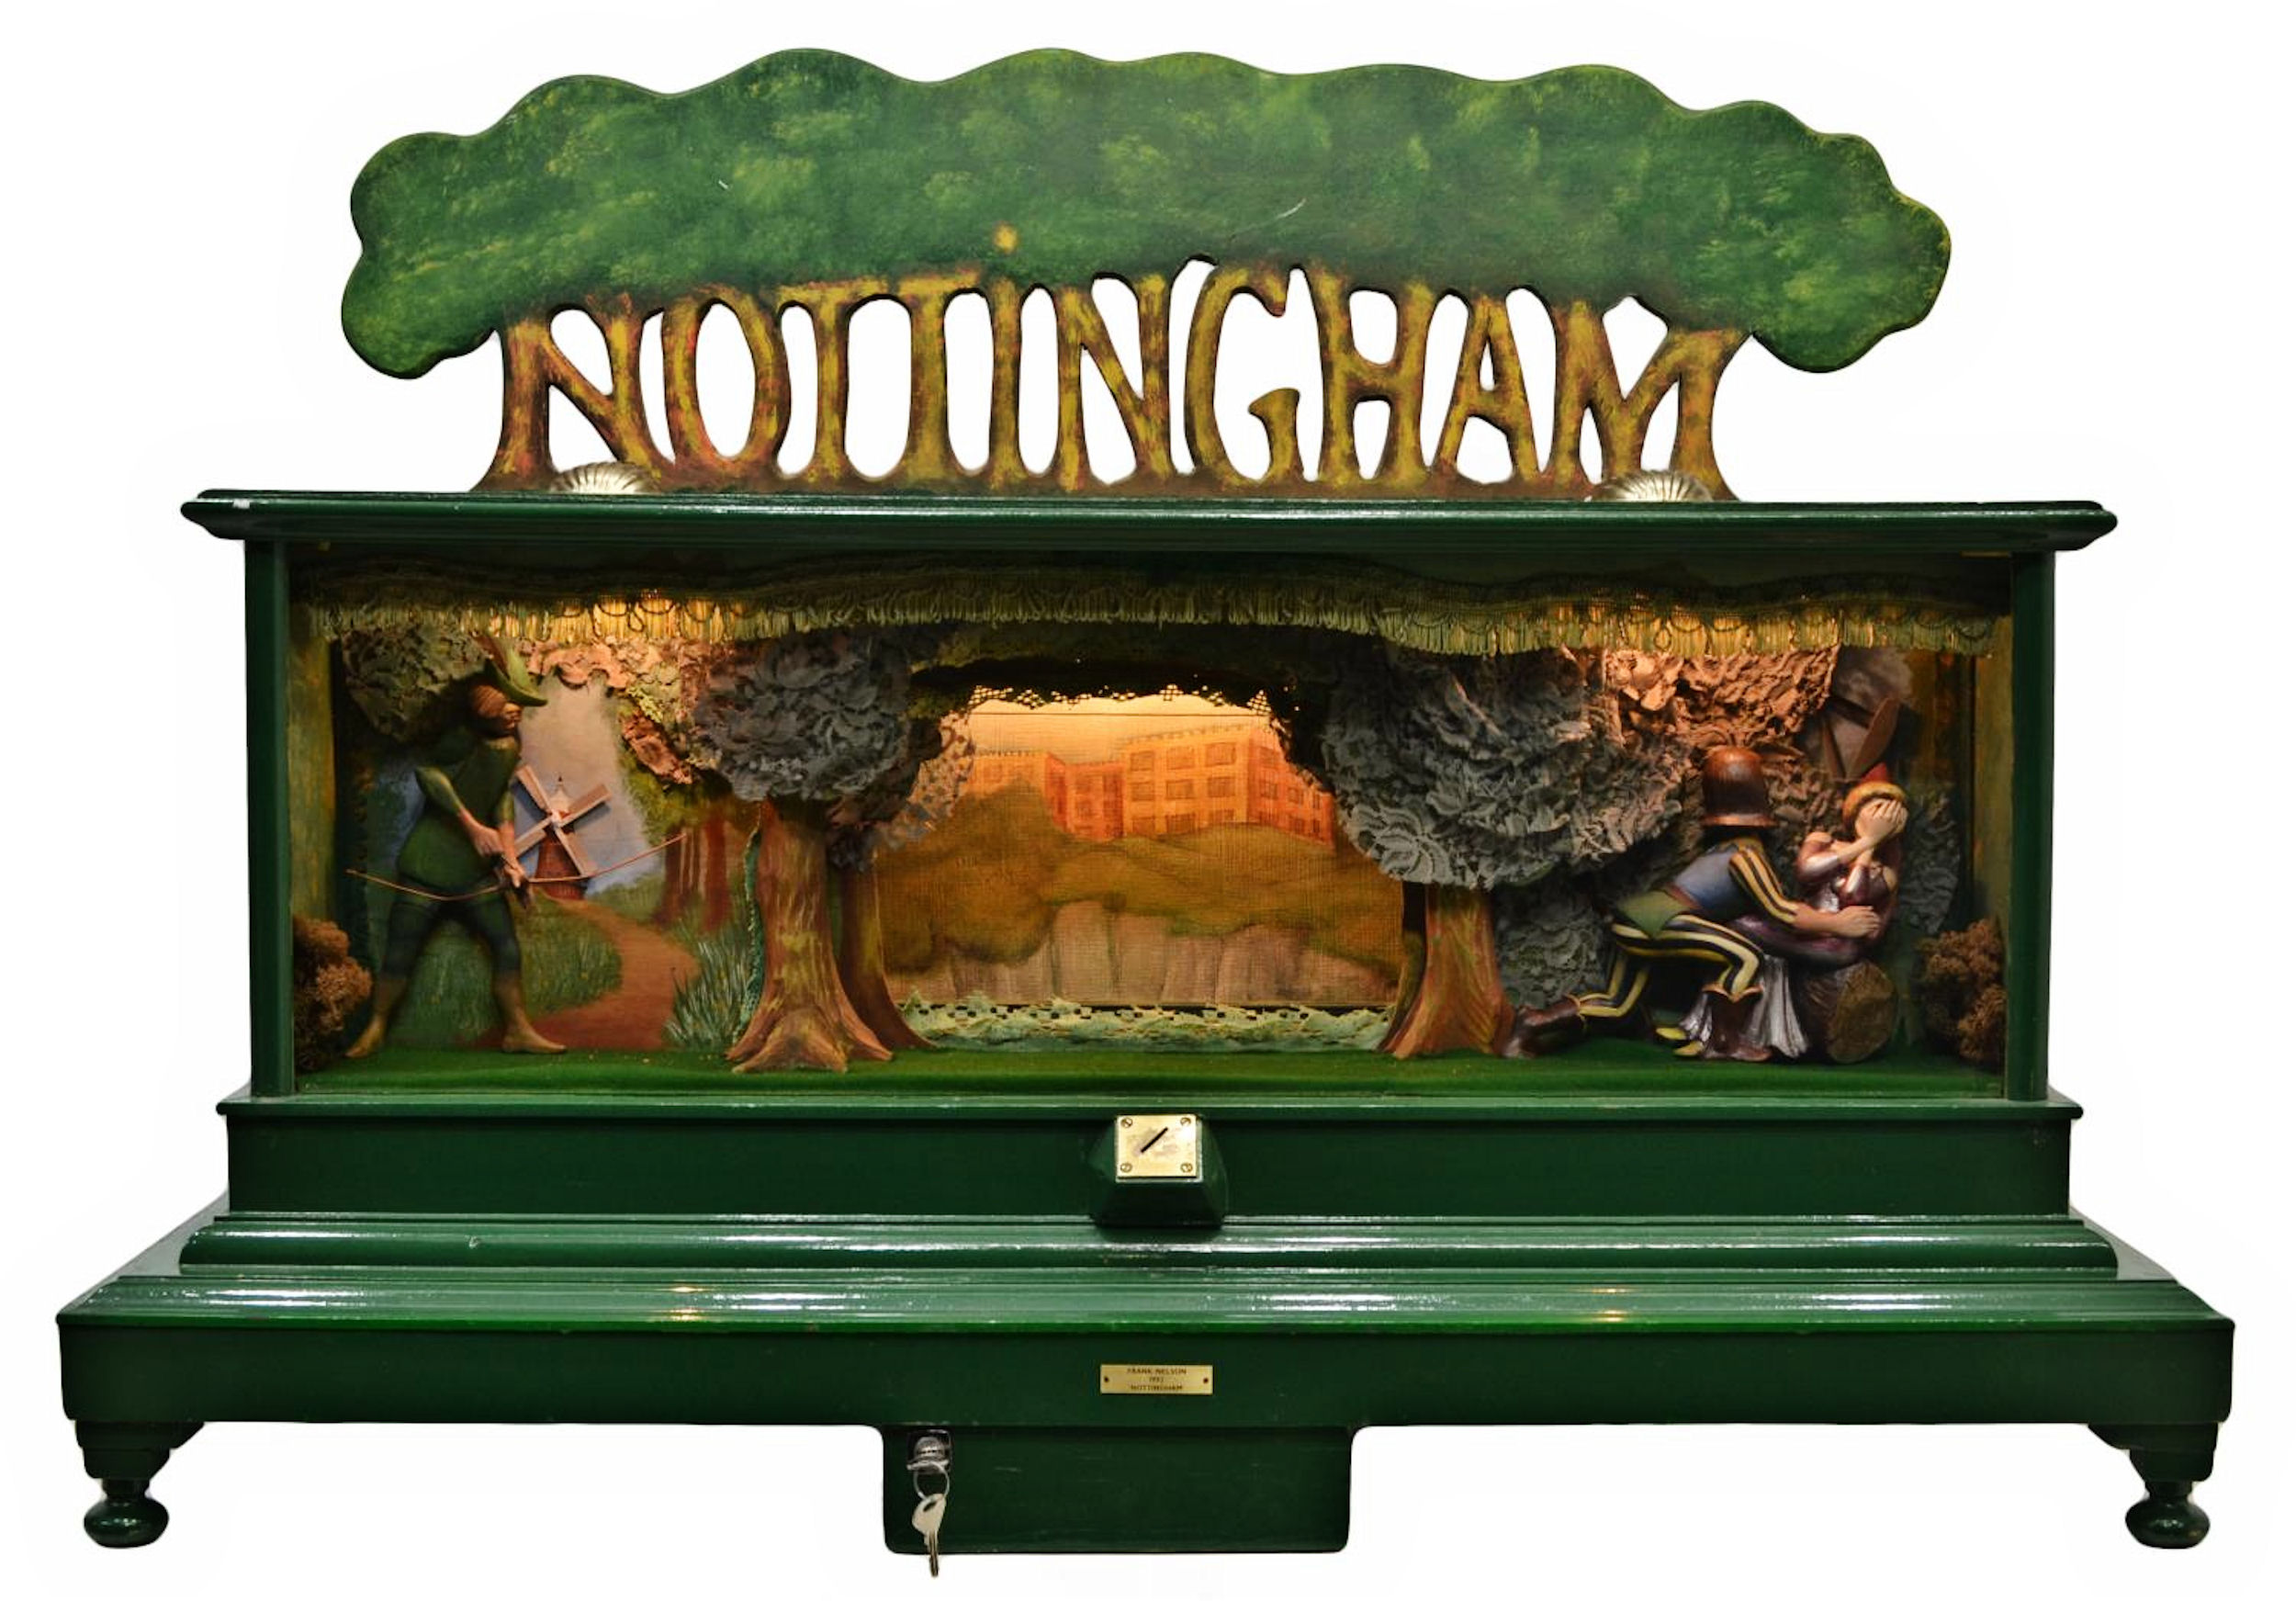 Custom-Built Carved and Painted Wood Automaton "Nottingham"